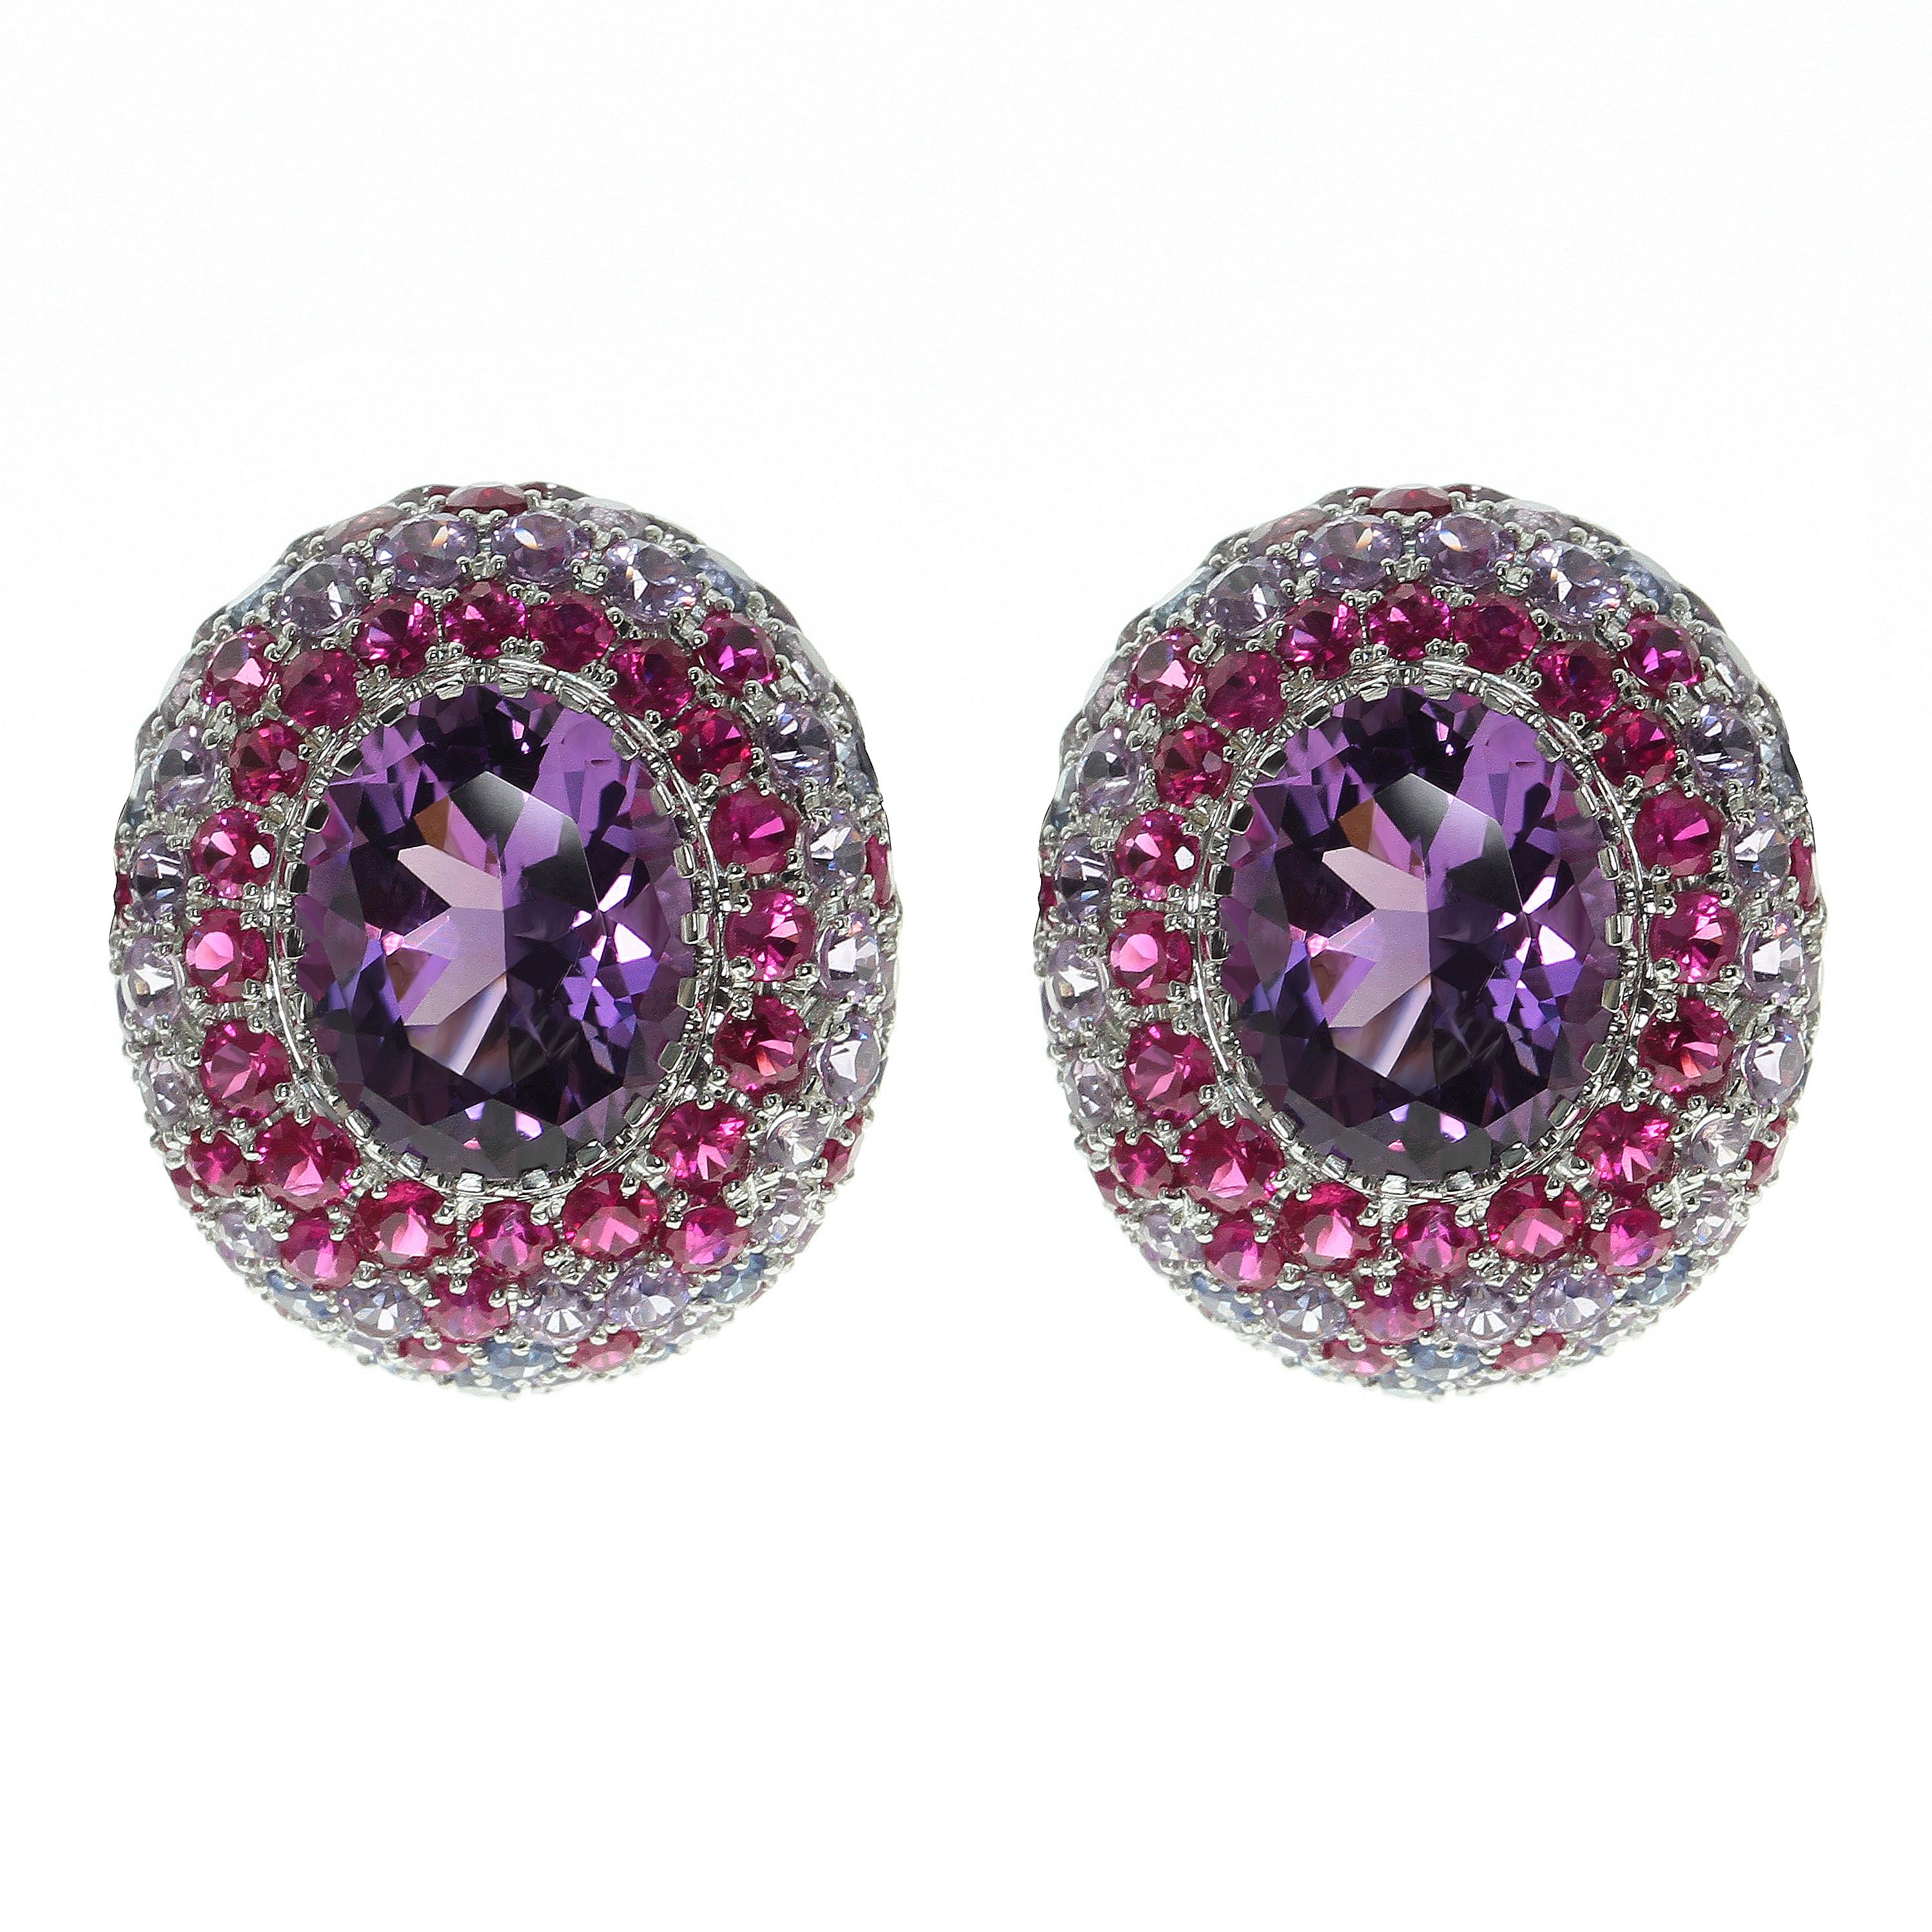 Amethyst Multicolor Sapphire 18 Karat Yellow Gold Earrings. It is a vibrant and colorfull earrings, perfect for everyday.

Accompanied with the Ring LU116414854213